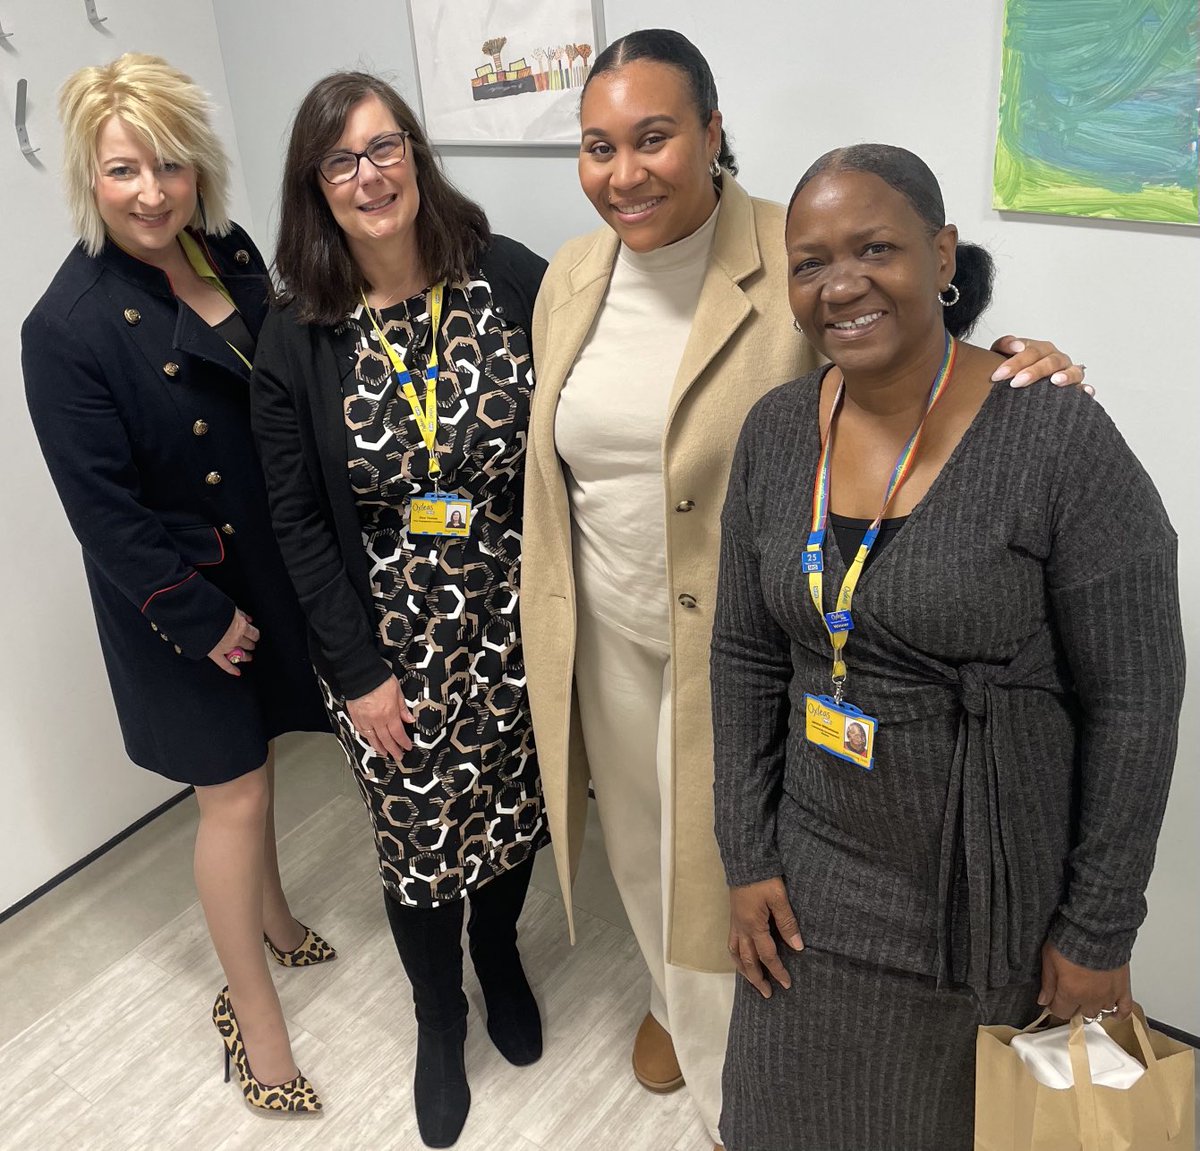 Gina, Genevieve & Janice ⁦@OxleasNHS⁩ - thank you so much for sharing your stories and work to help building a fairer Oxleas #Involvement. 🎬📽️ coming soon #QueenMary’s, Sidcup. ⁦@JapleenOxleas⁩ @DoctorBeechwood ⁦@OxPatientExp⁩